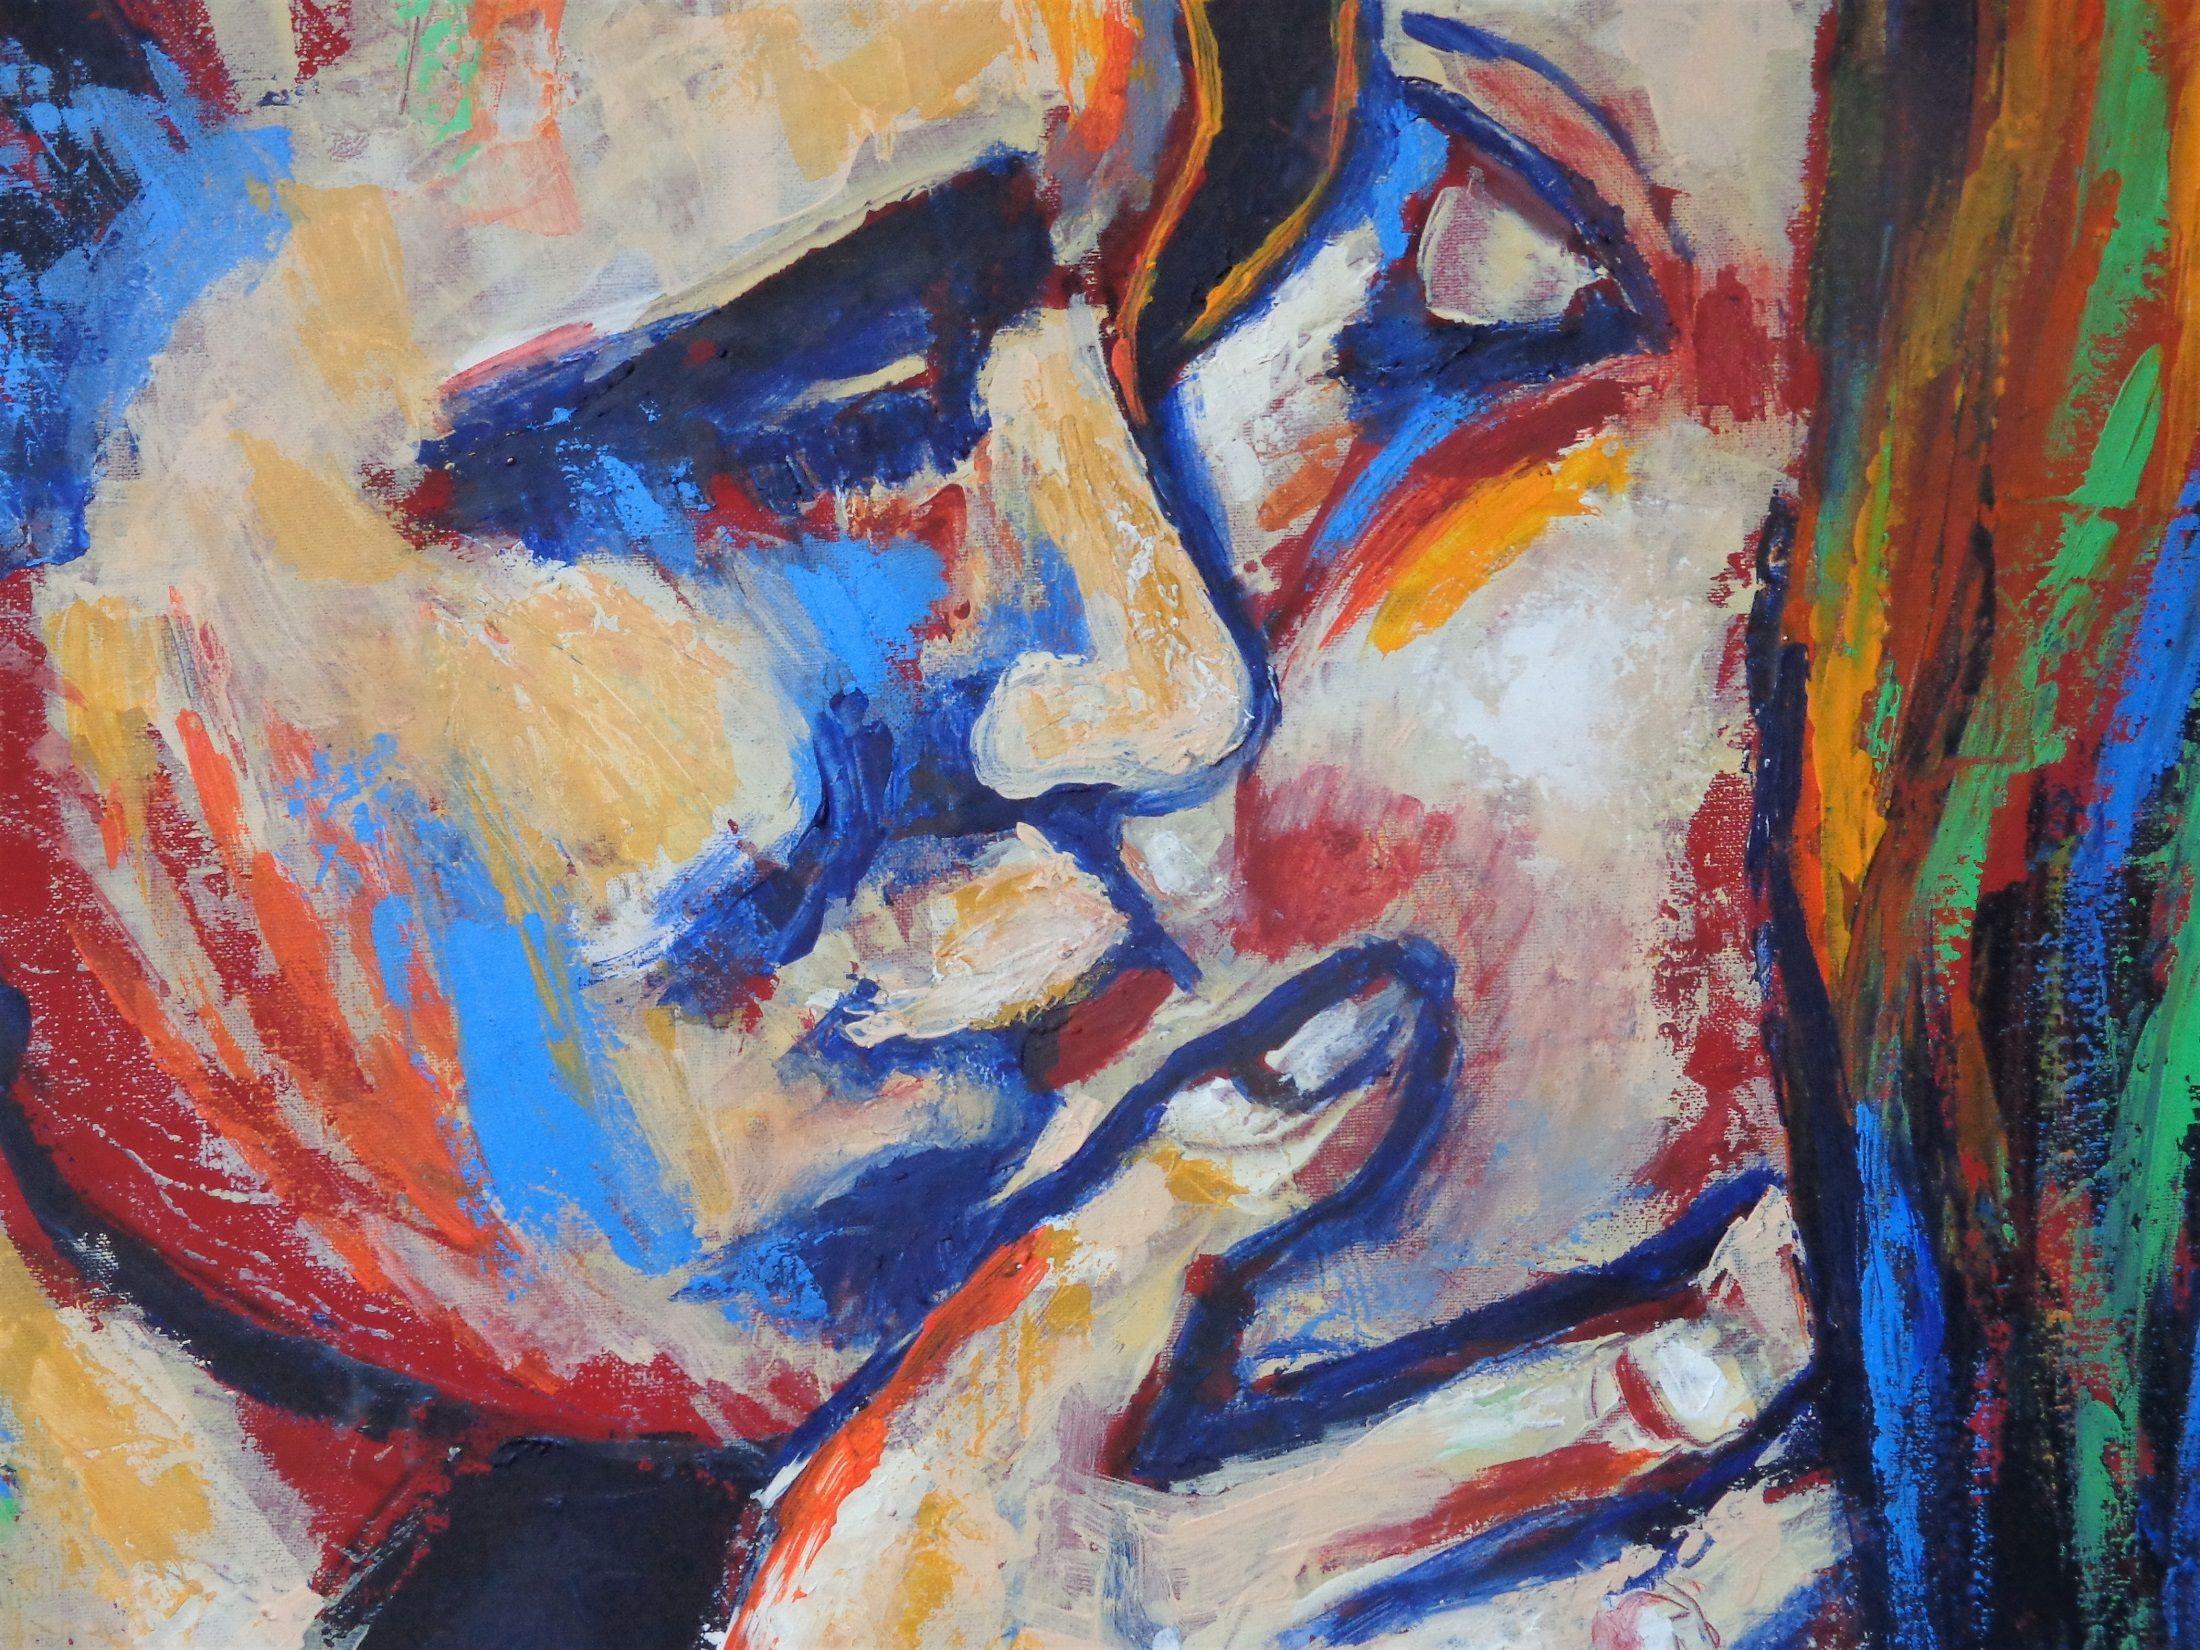 Original figurative contemporary acrylics and oils painting on canvas. Part of the series 